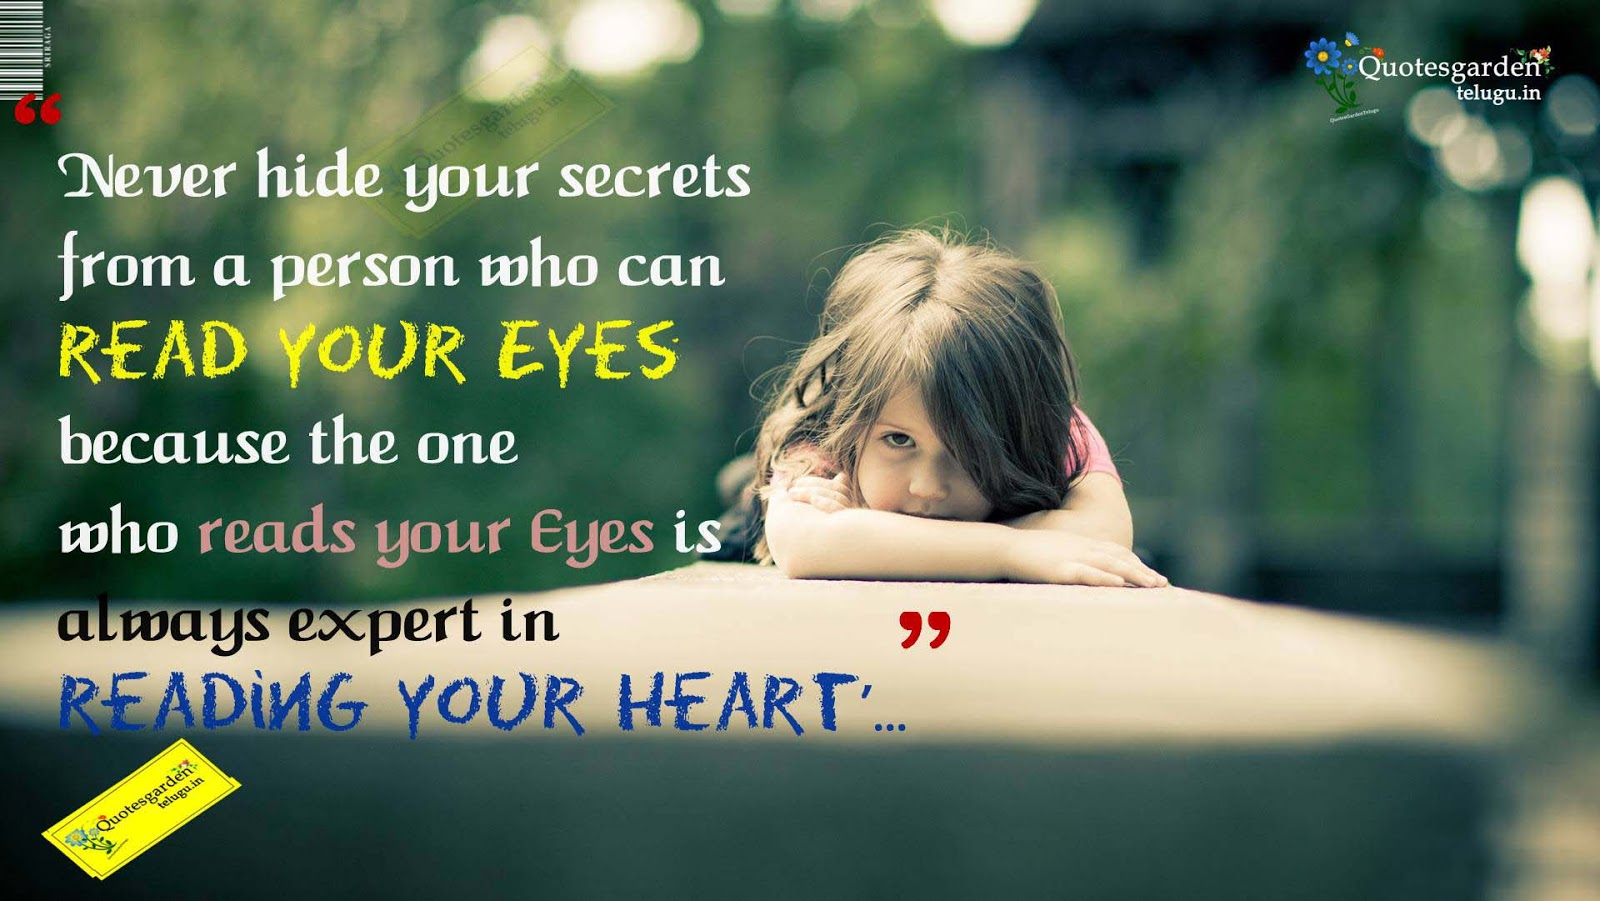 Heart touching Quotes with hd wallpapers 774 QUOTES GARDEN